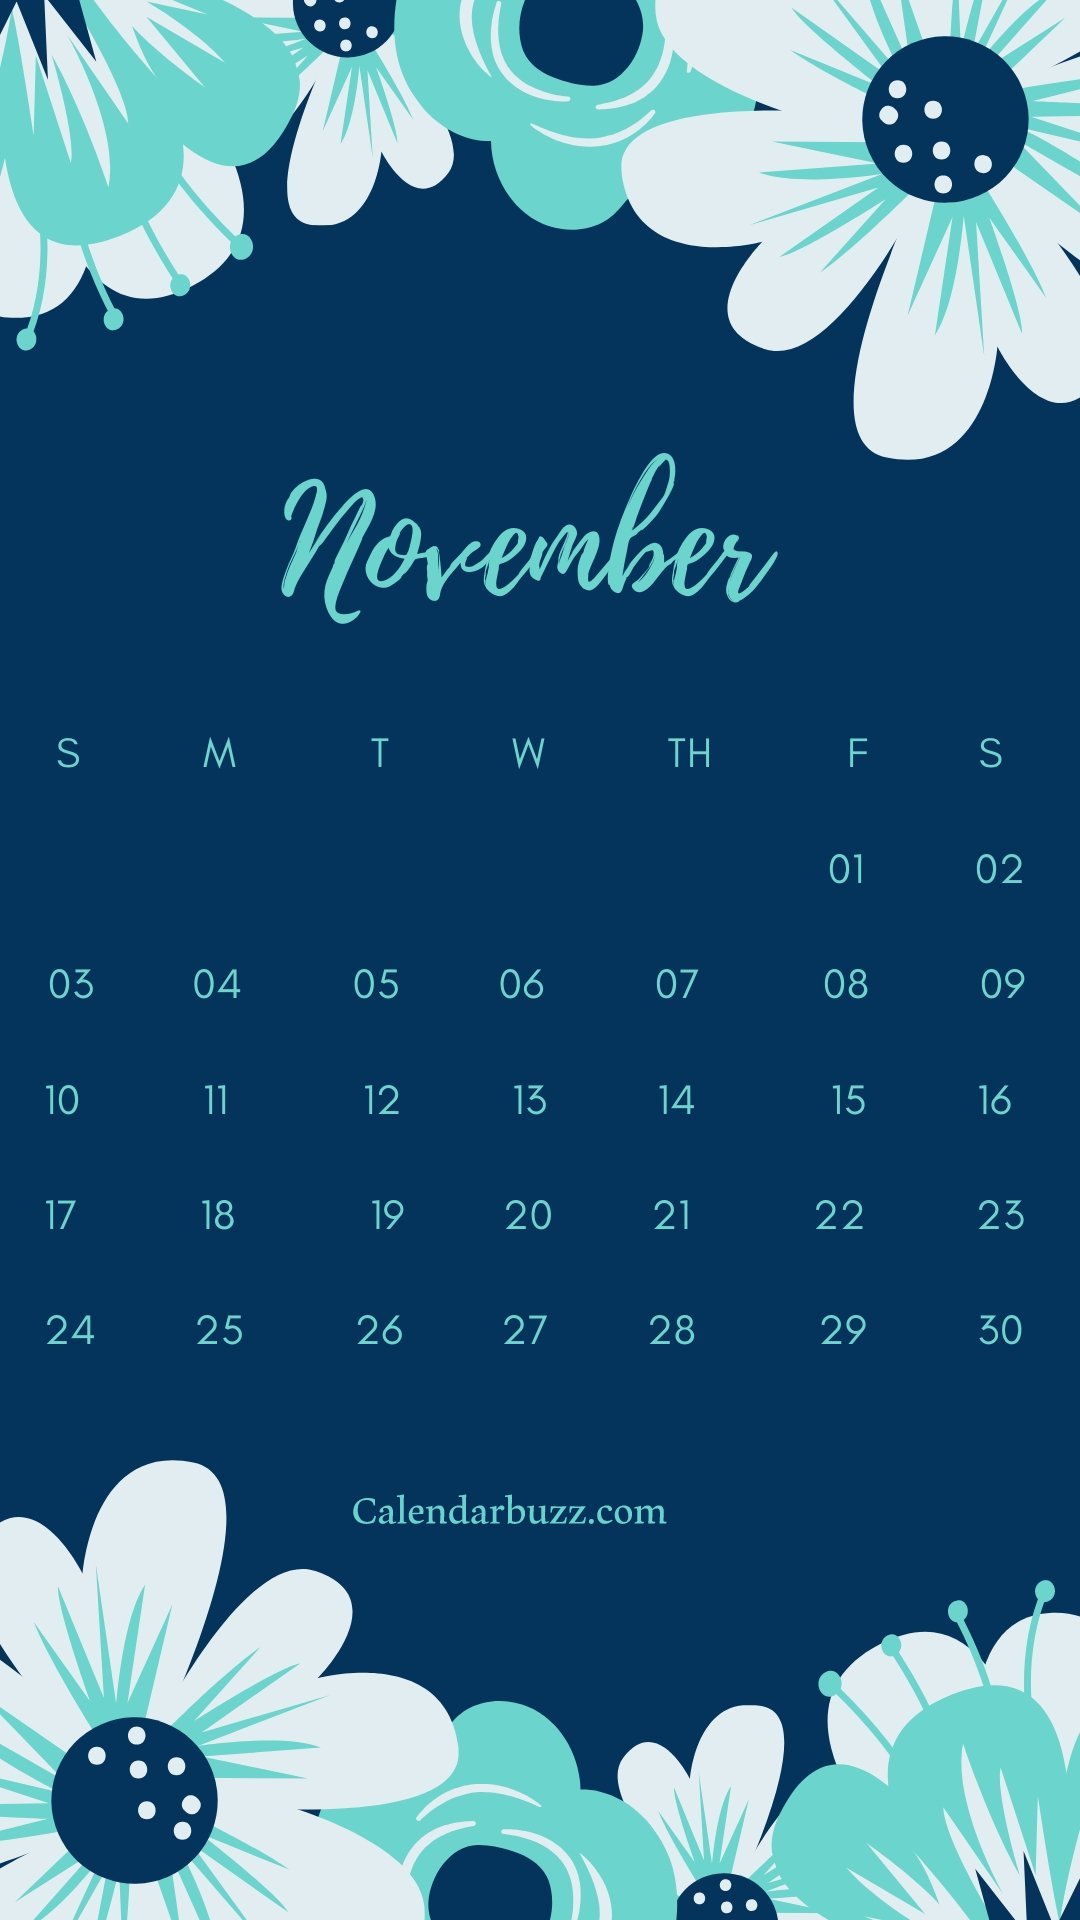 November 2019 Iphone Calendar Wallpaper - Blue Flowers With Quotes - HD Wallpaper 